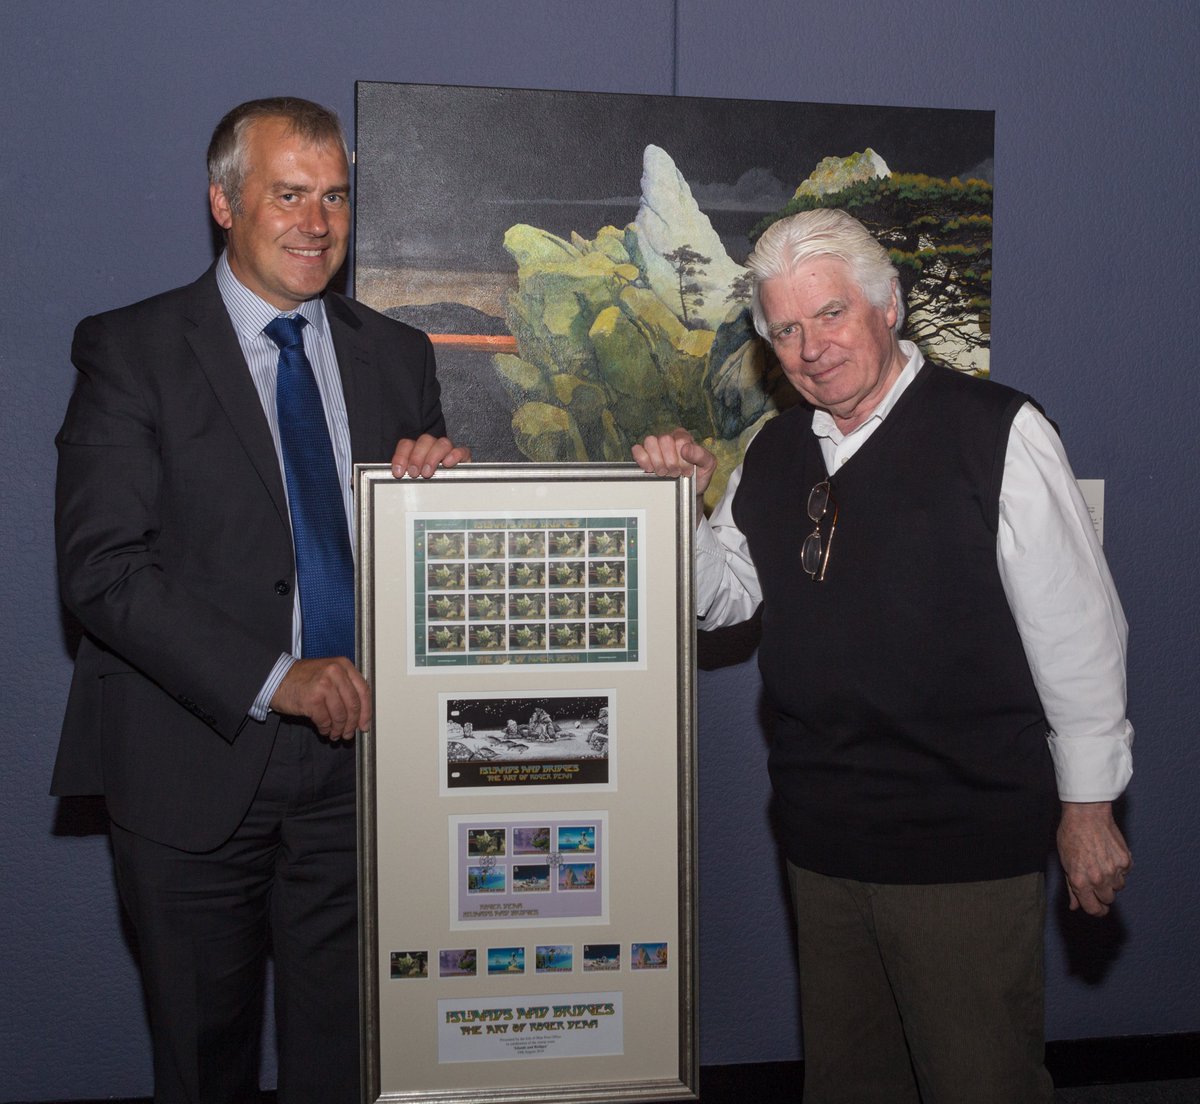 #TBT to our chairman presenting @_rogerdean with a framed set of stamps at the private viewing of his exhibition